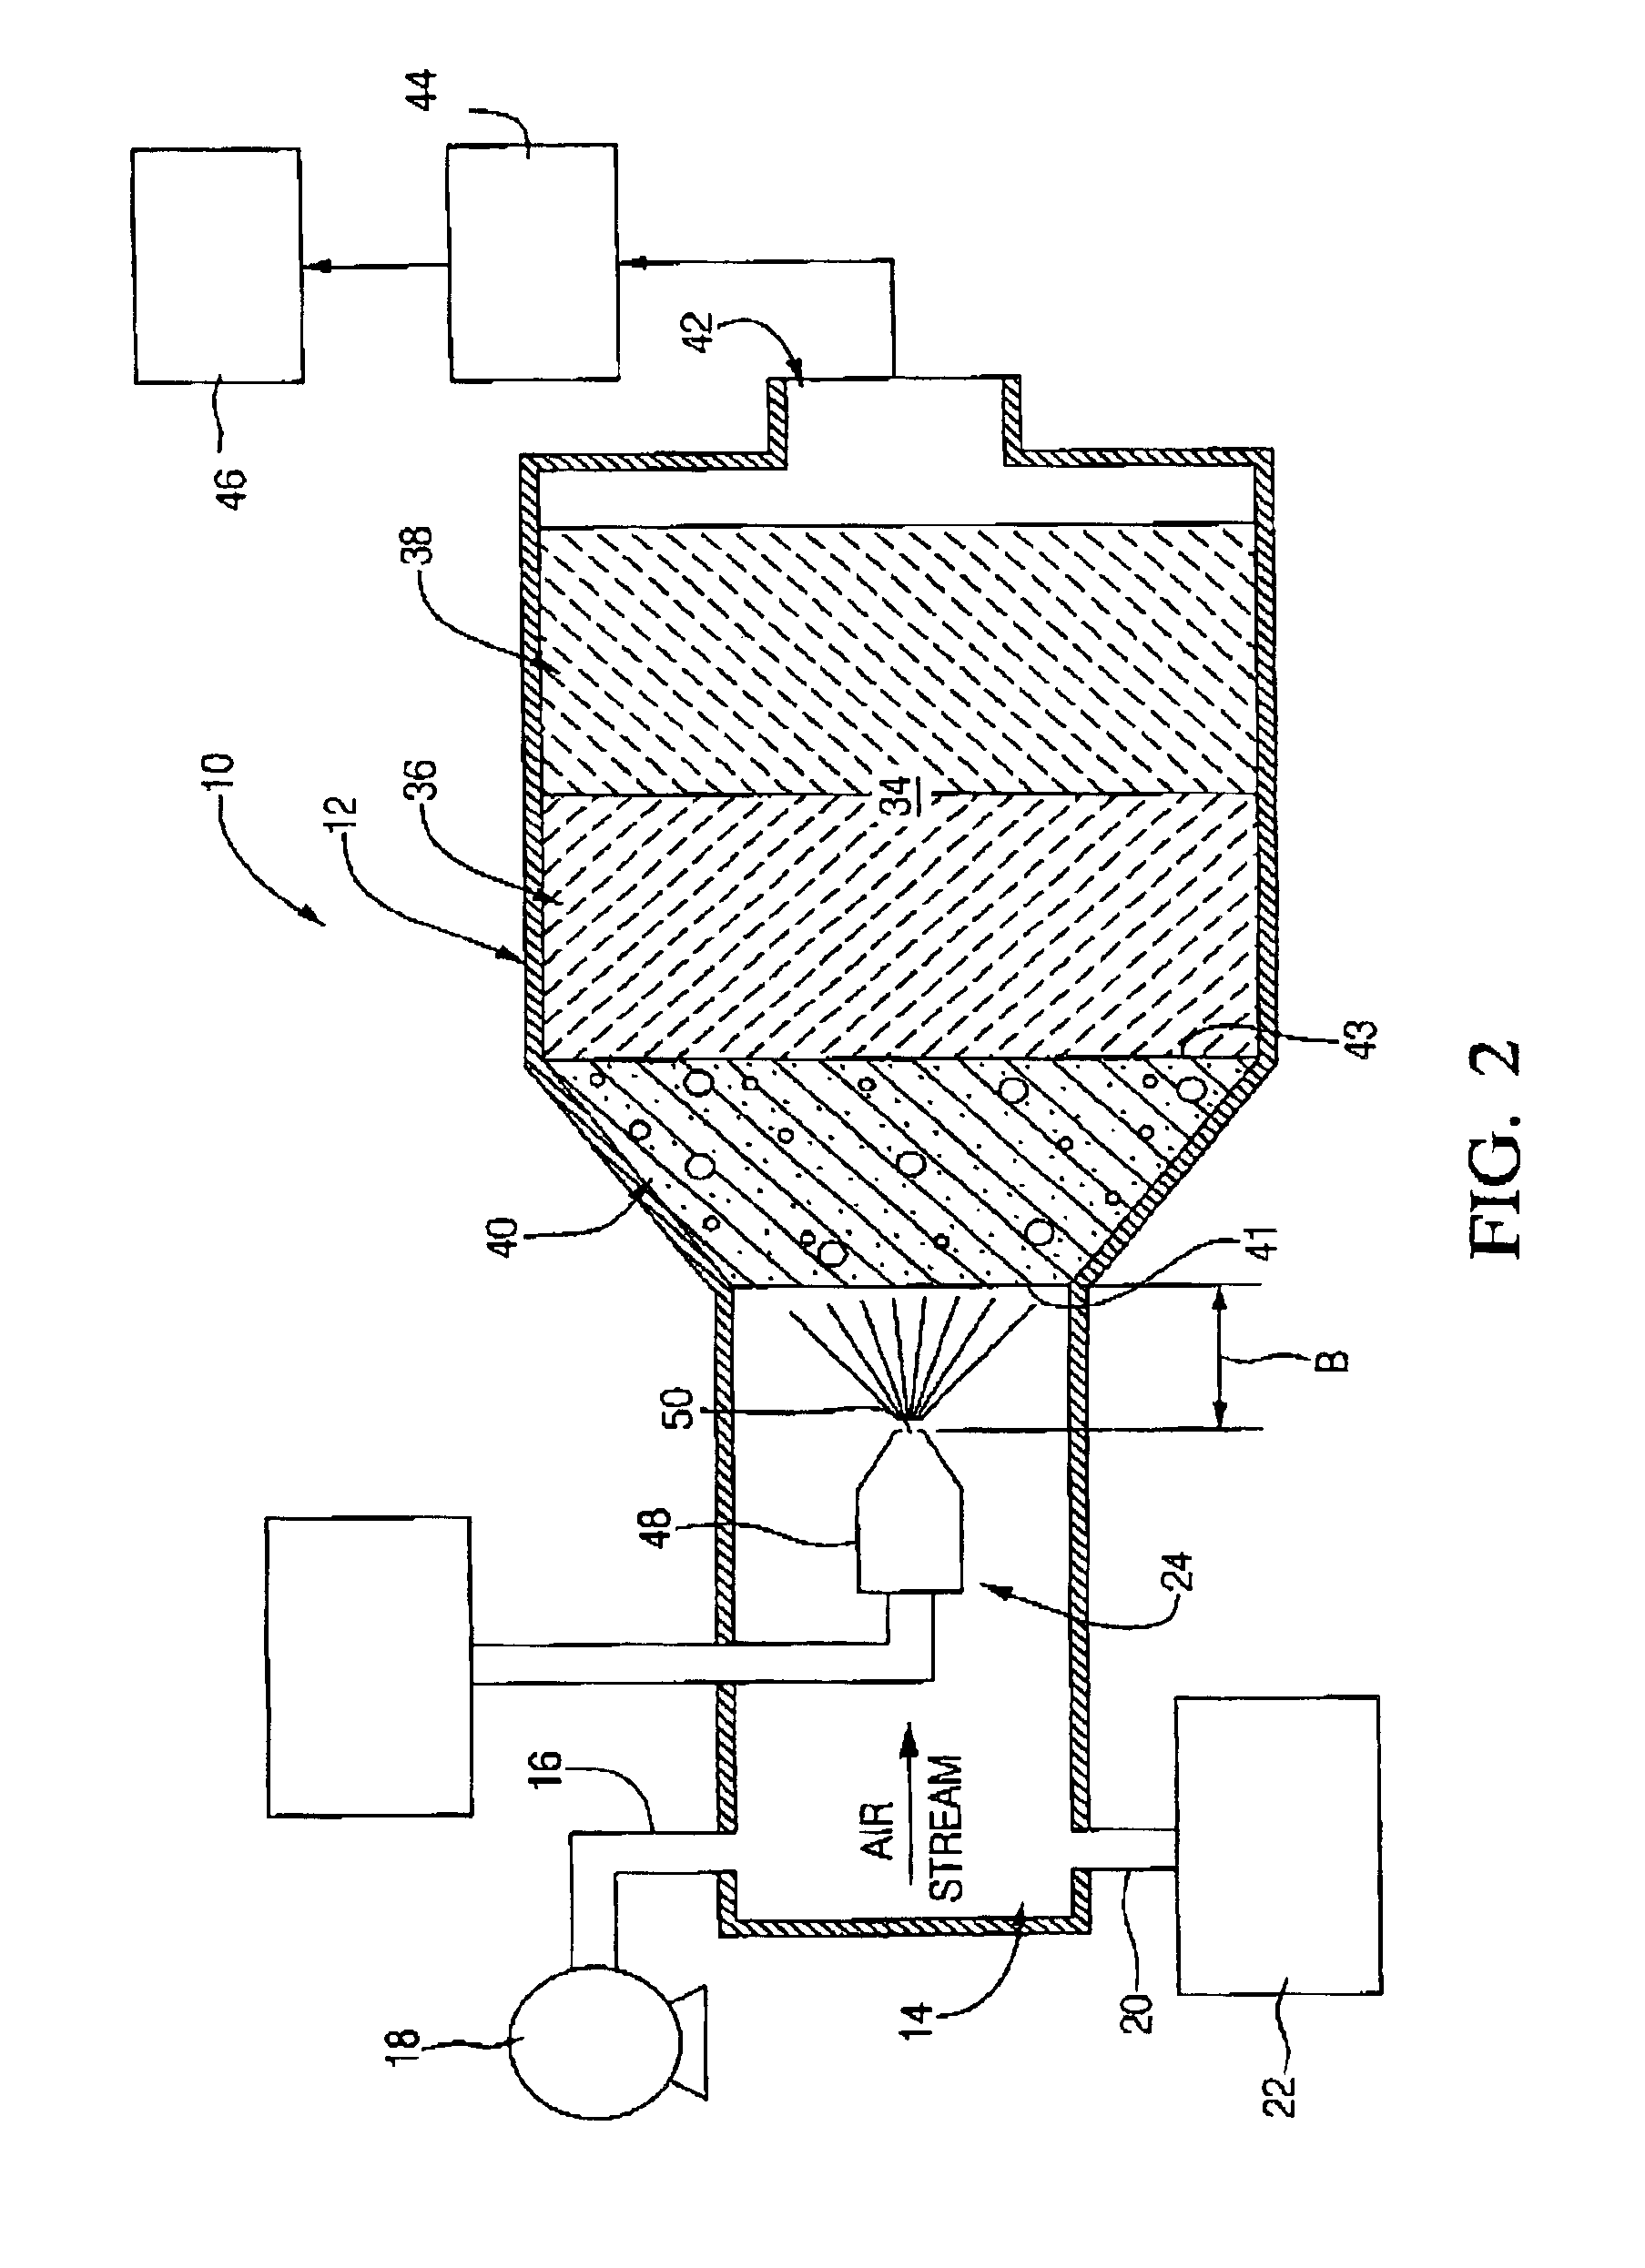 Reactor system including auto ignition and carbon suppression foam